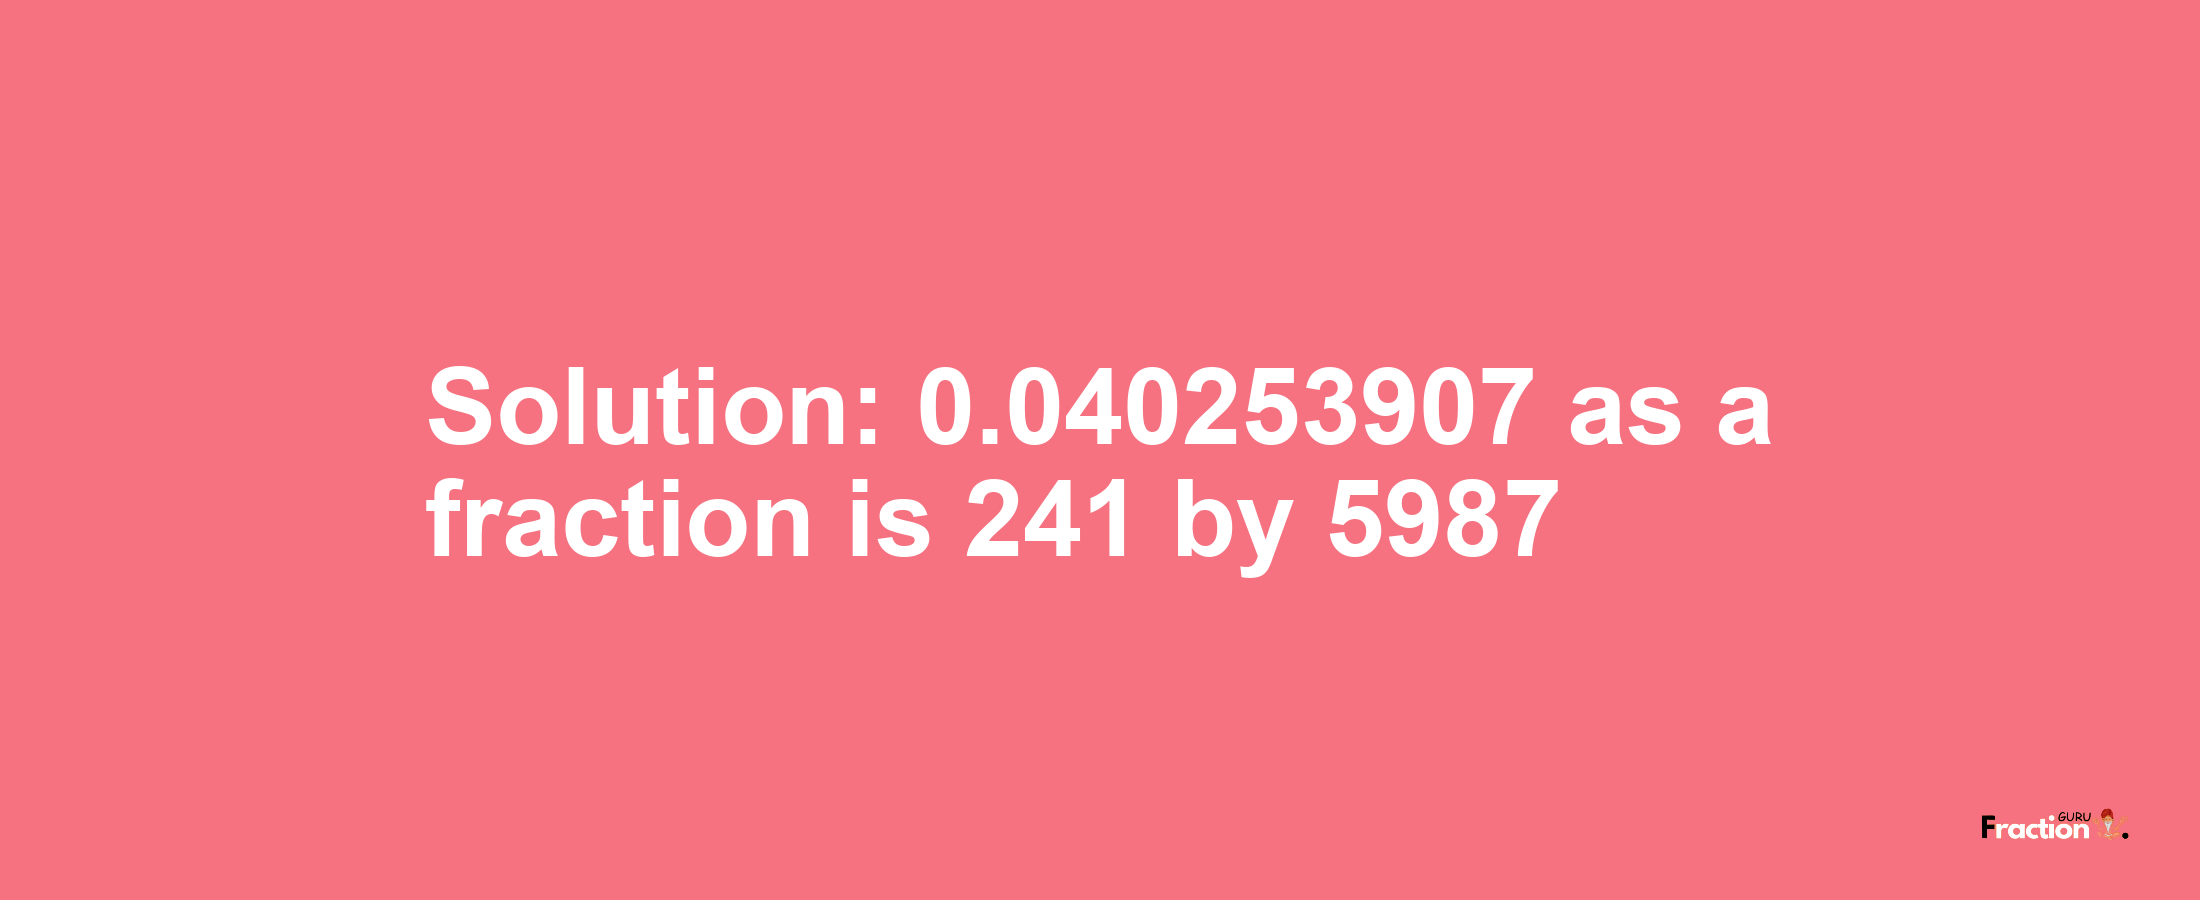 Solution:0.040253907 as a fraction is 241/5987